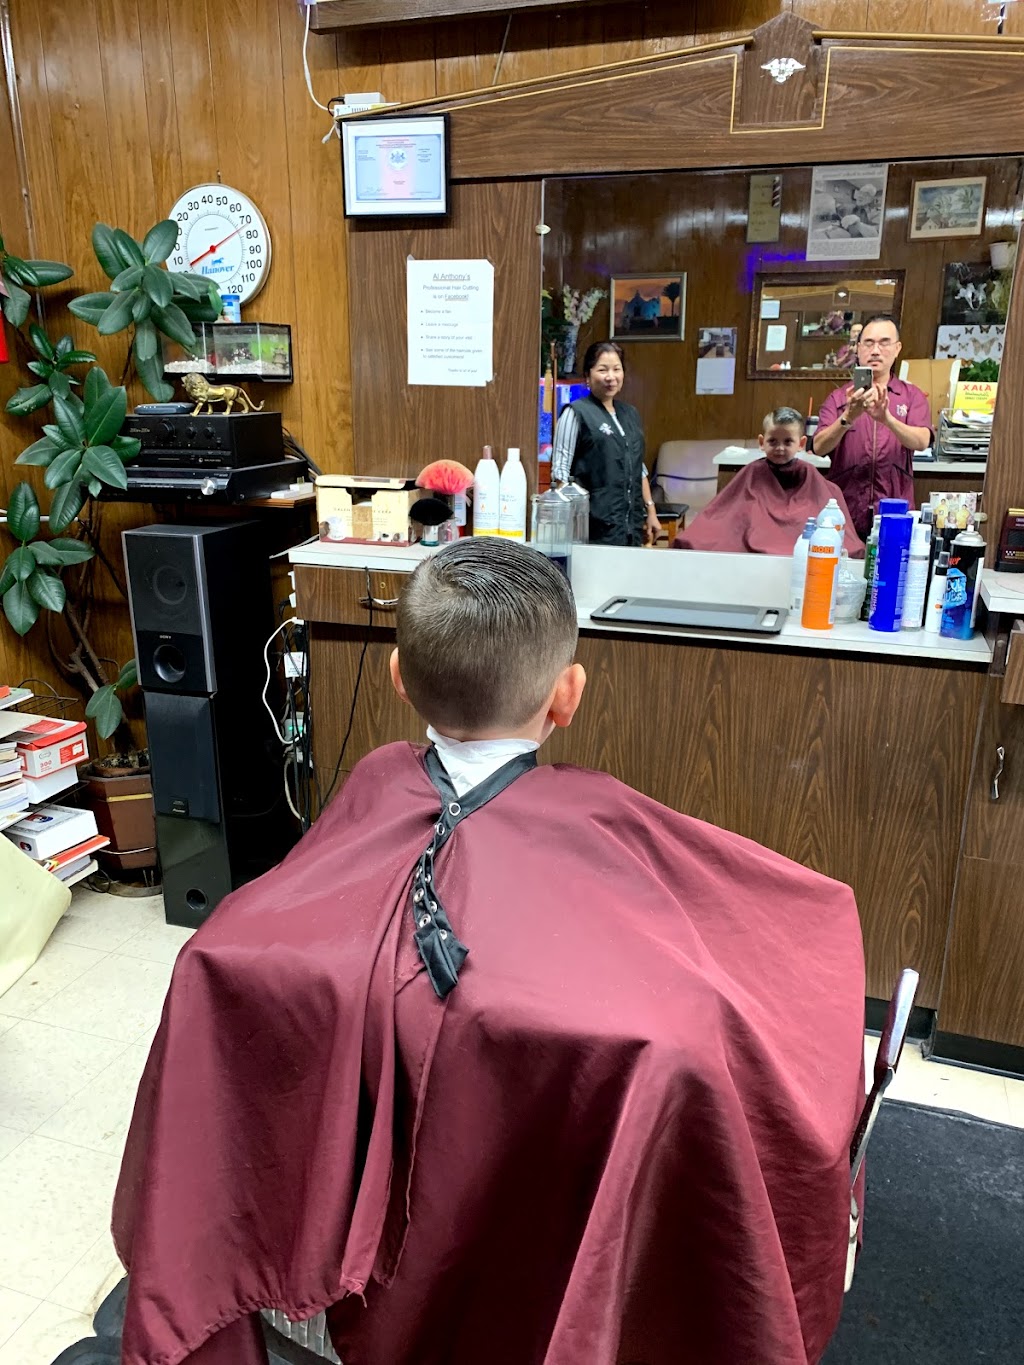 Michael’ s professional Haircutting | 1937 W MacDade Blvd f11, Woodlyn, PA 19094 | Phone: (610) 872-9840